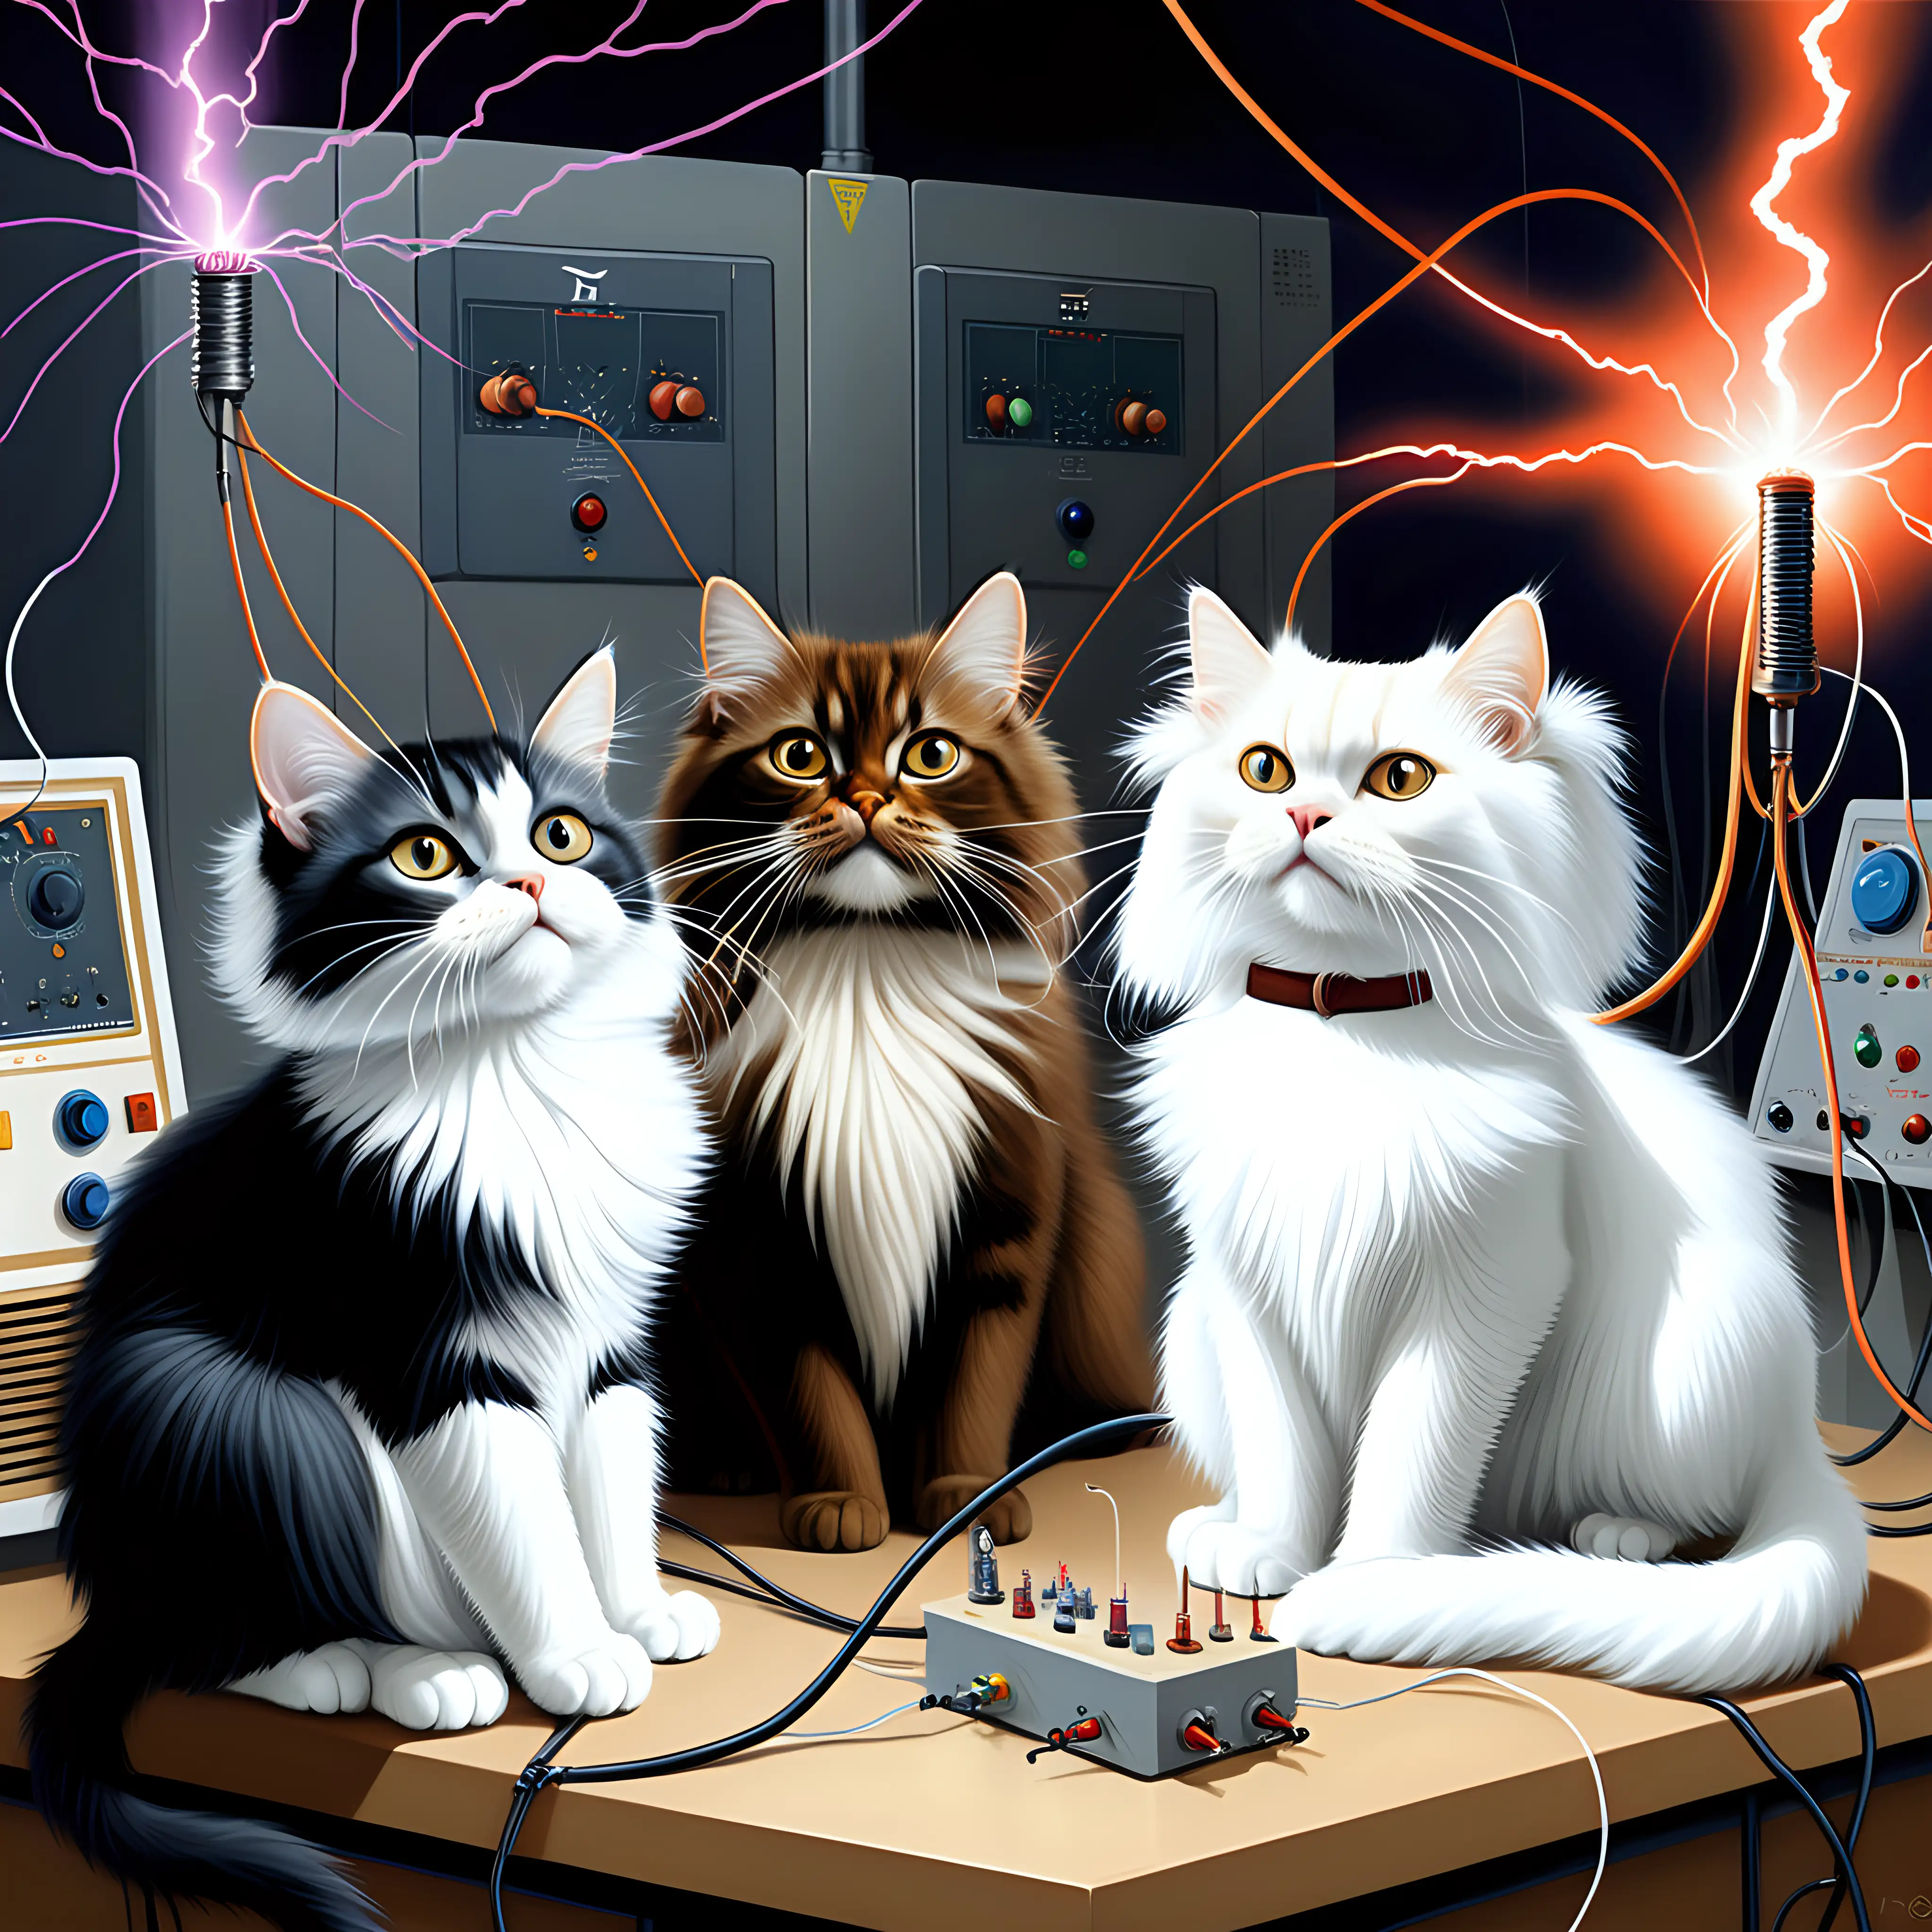 Whimsical Feline Play Surrealistic Cats and Tesla Coil Extravaganza